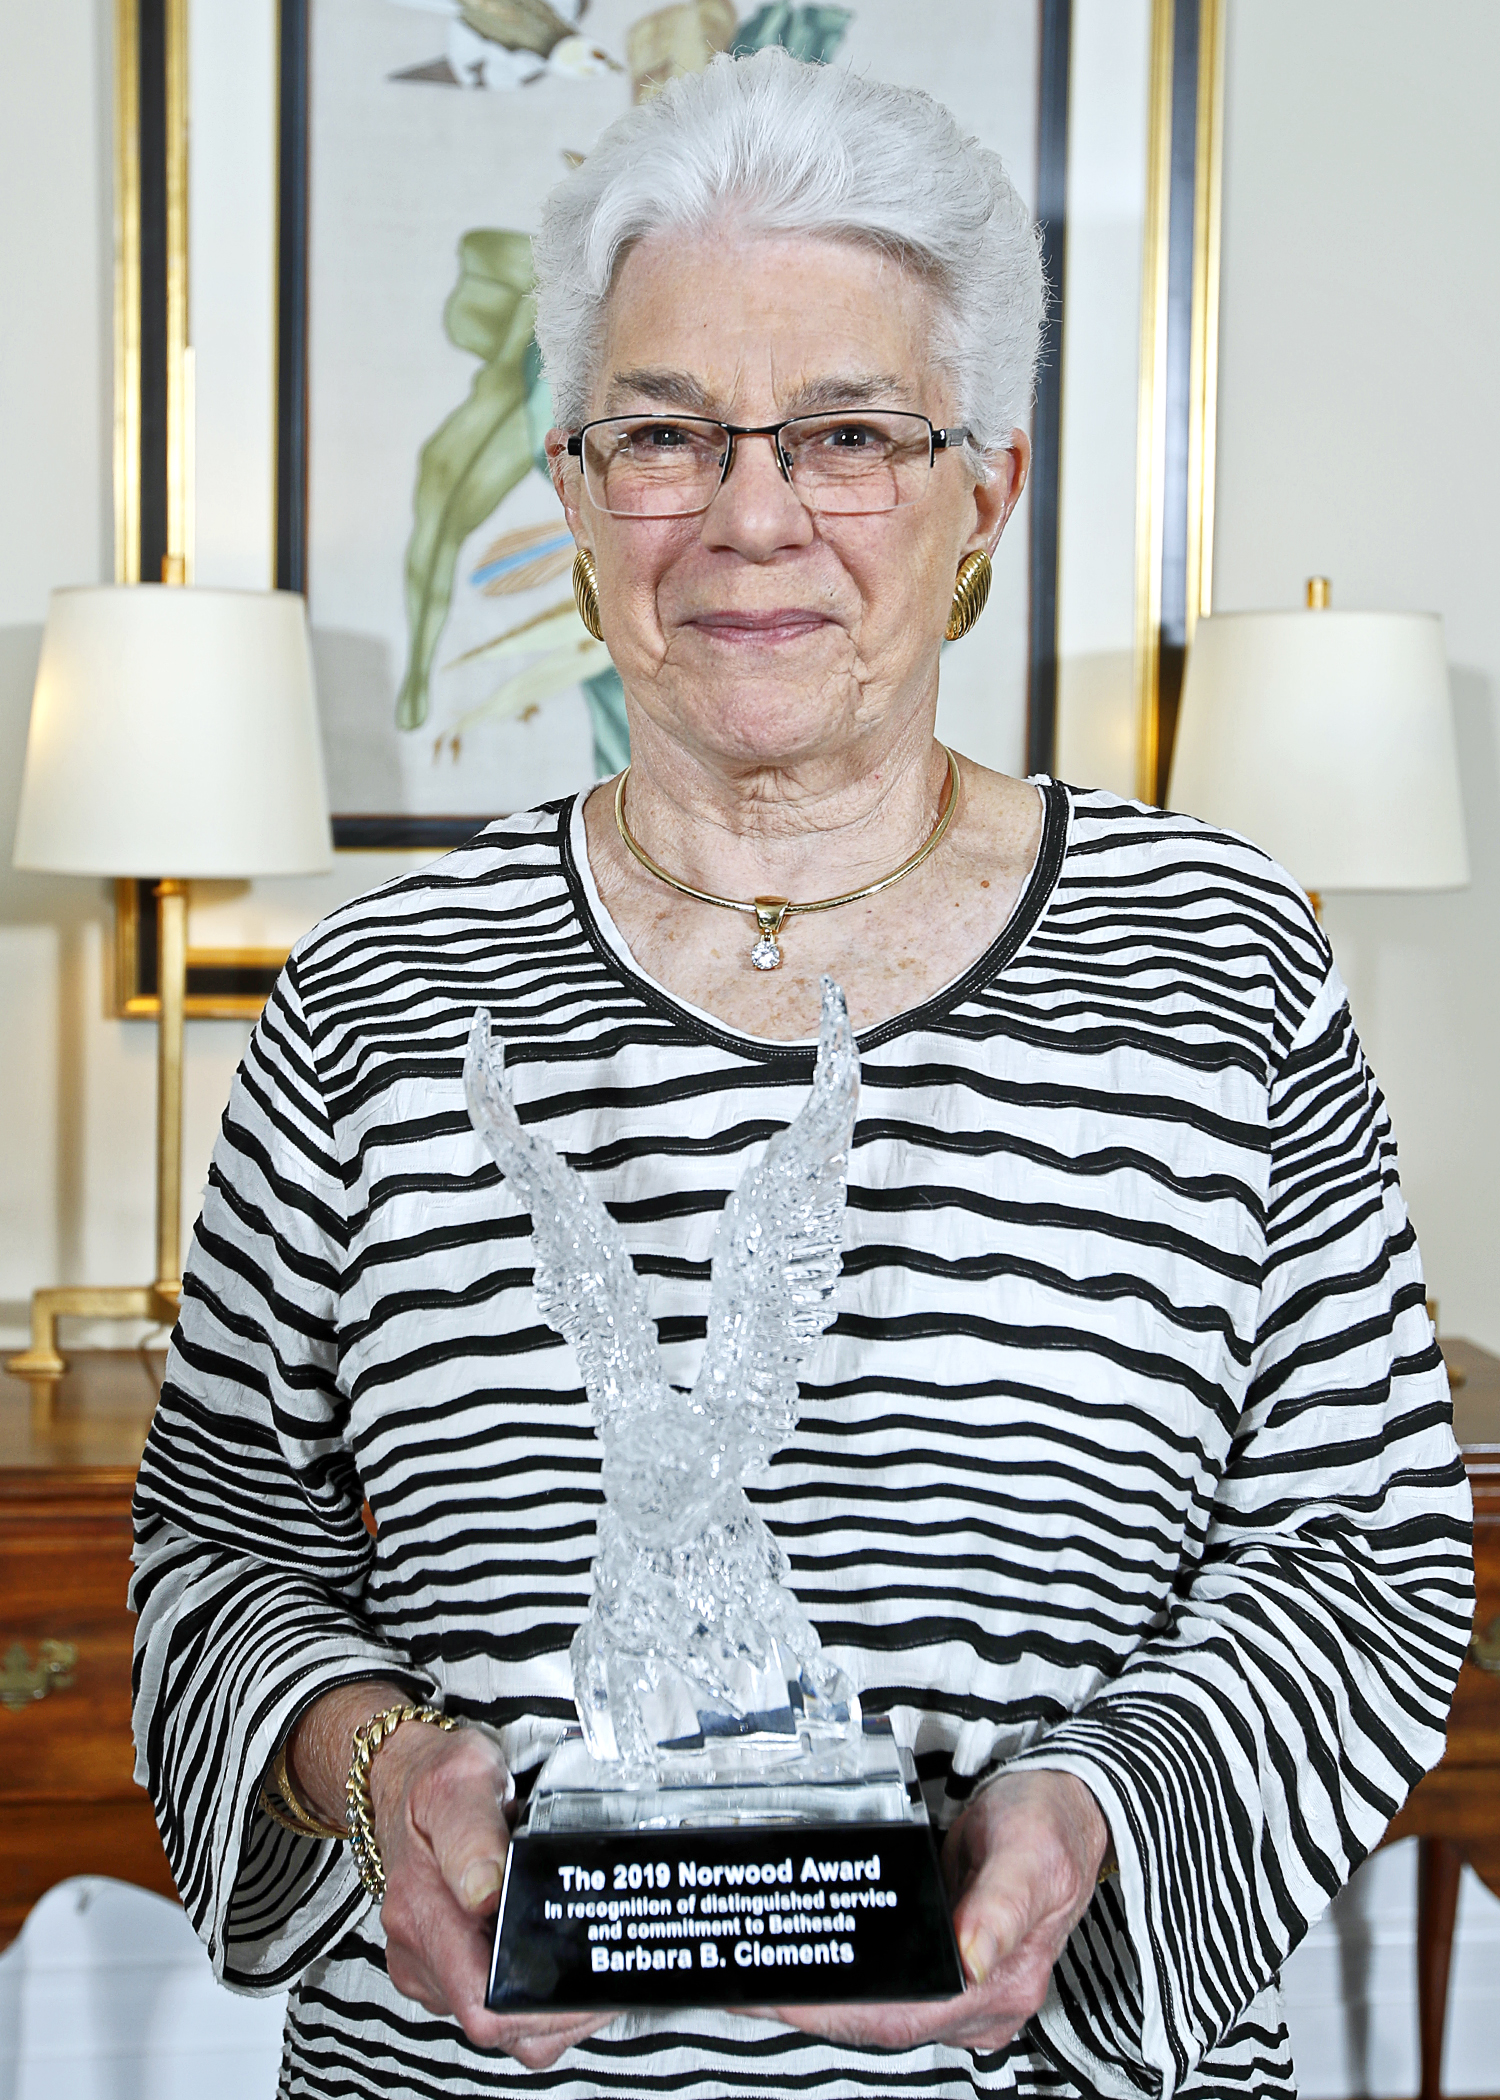 Barbara Clements